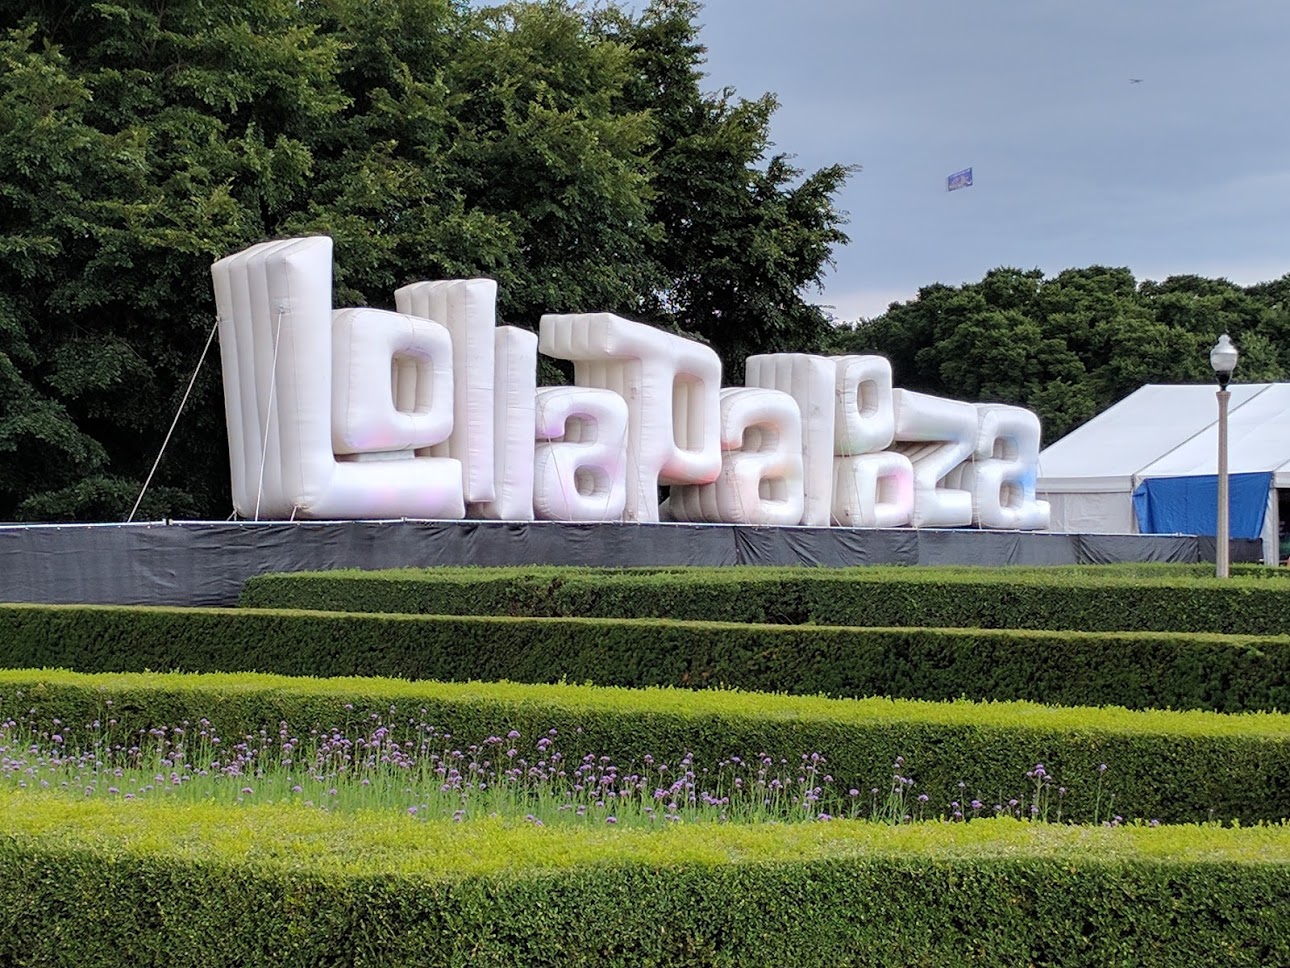 Lollapalooza%3A+What+to+Expect+at+a+Music+Festival